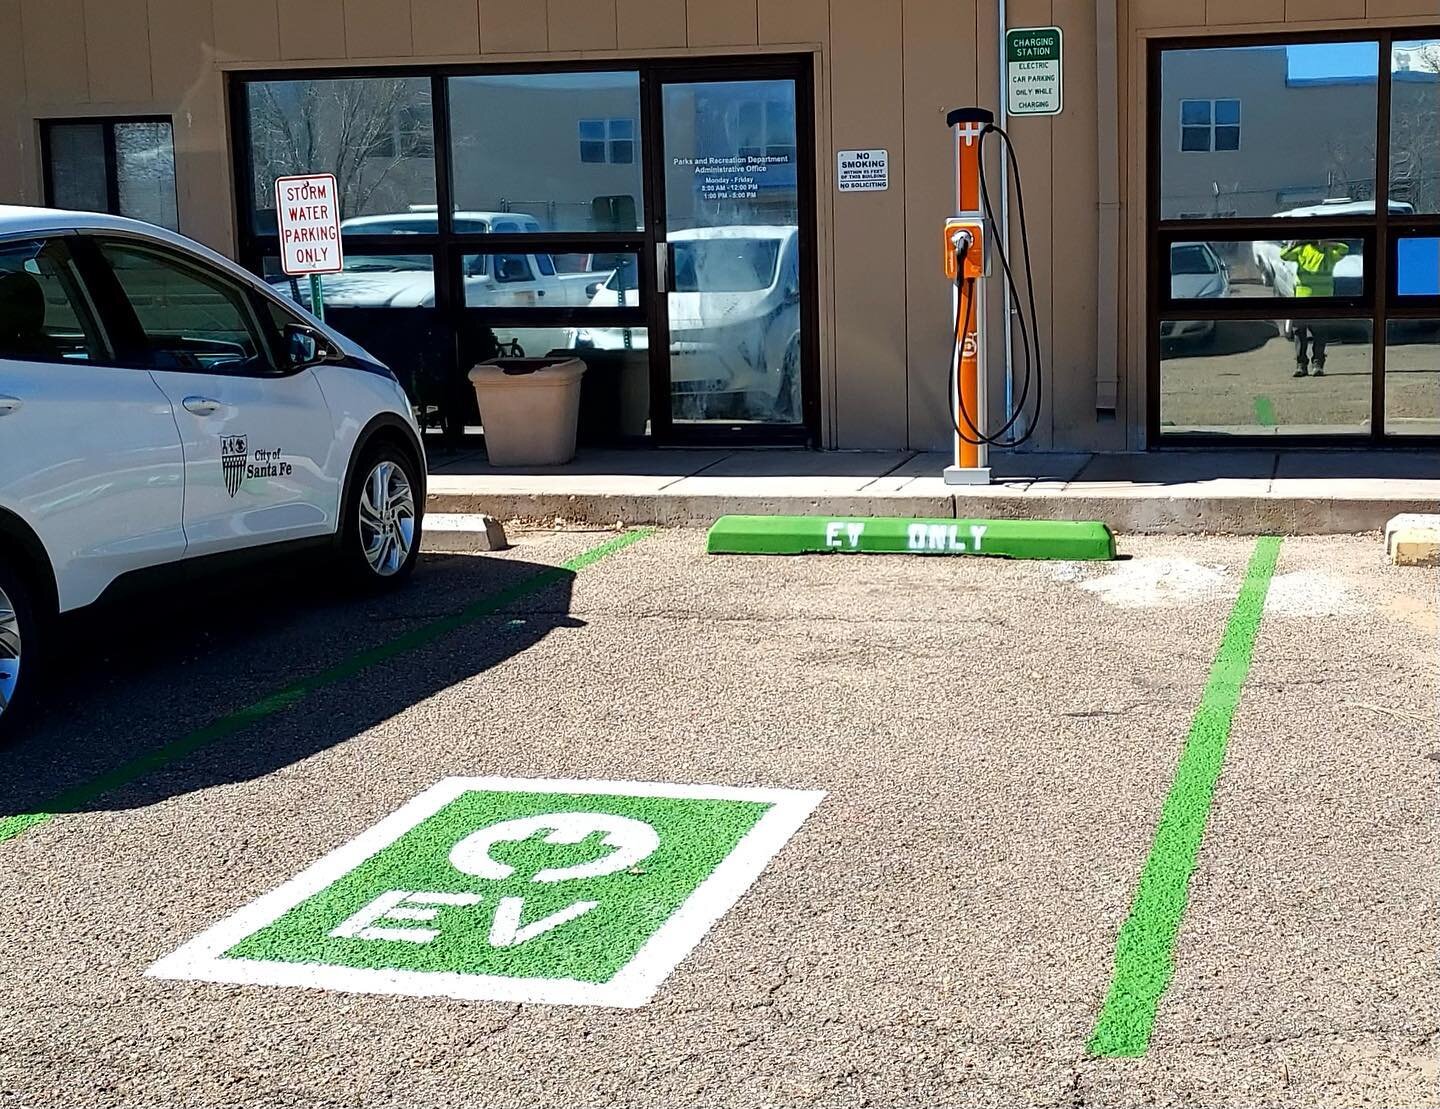 New Level 2 #chargepoint EV charging stations for City of Santa Fe office buildings
.
.
.
#evcharging #ev #cleanenergy #cityofsantafe #newmexico